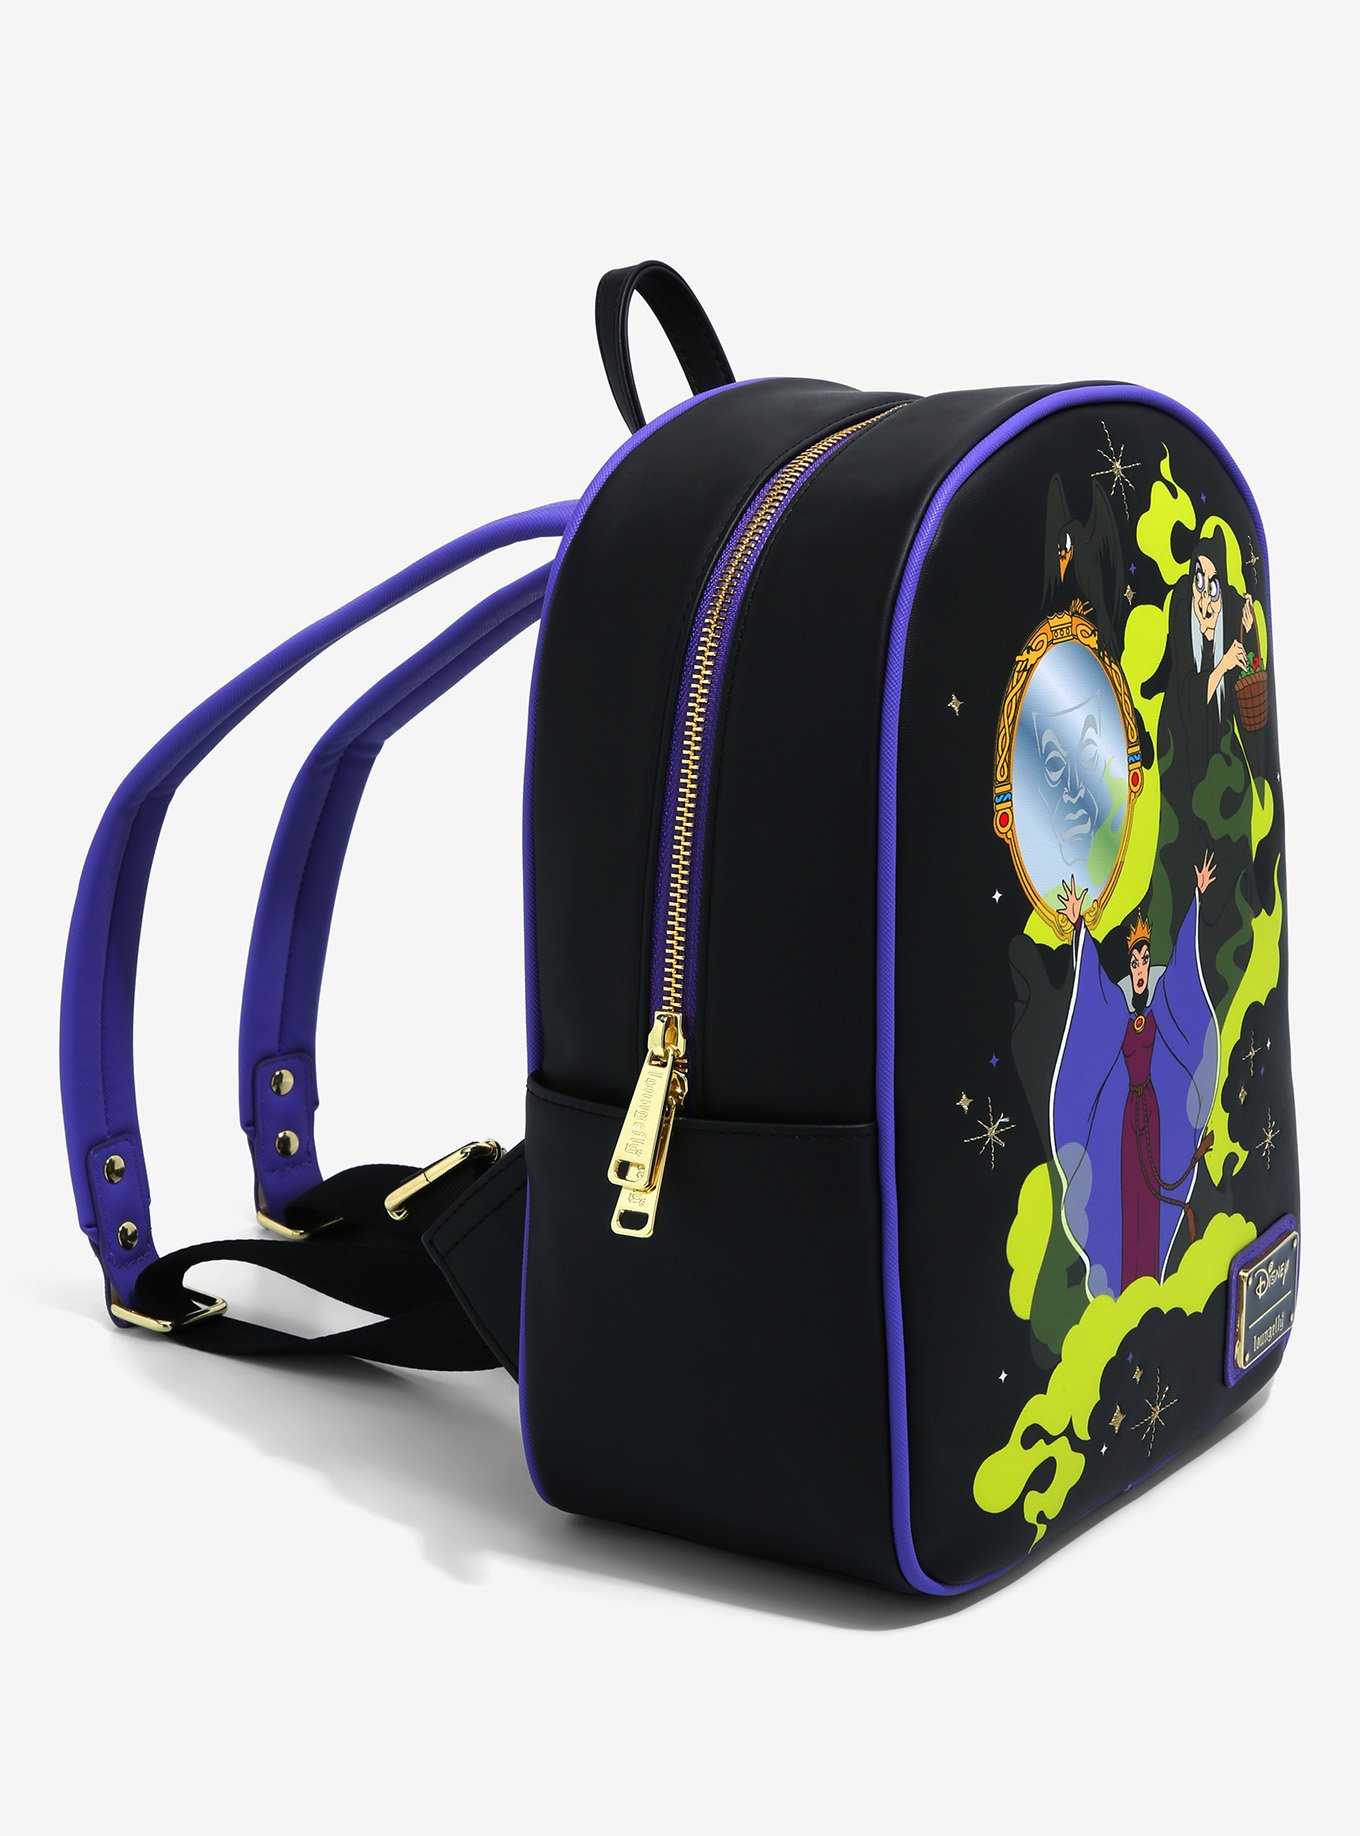 Loungefly Disney Snow White and the Seven Dwarfs Evil Queen Mini Backpack - BoxLunch Exclusive, , hi-res